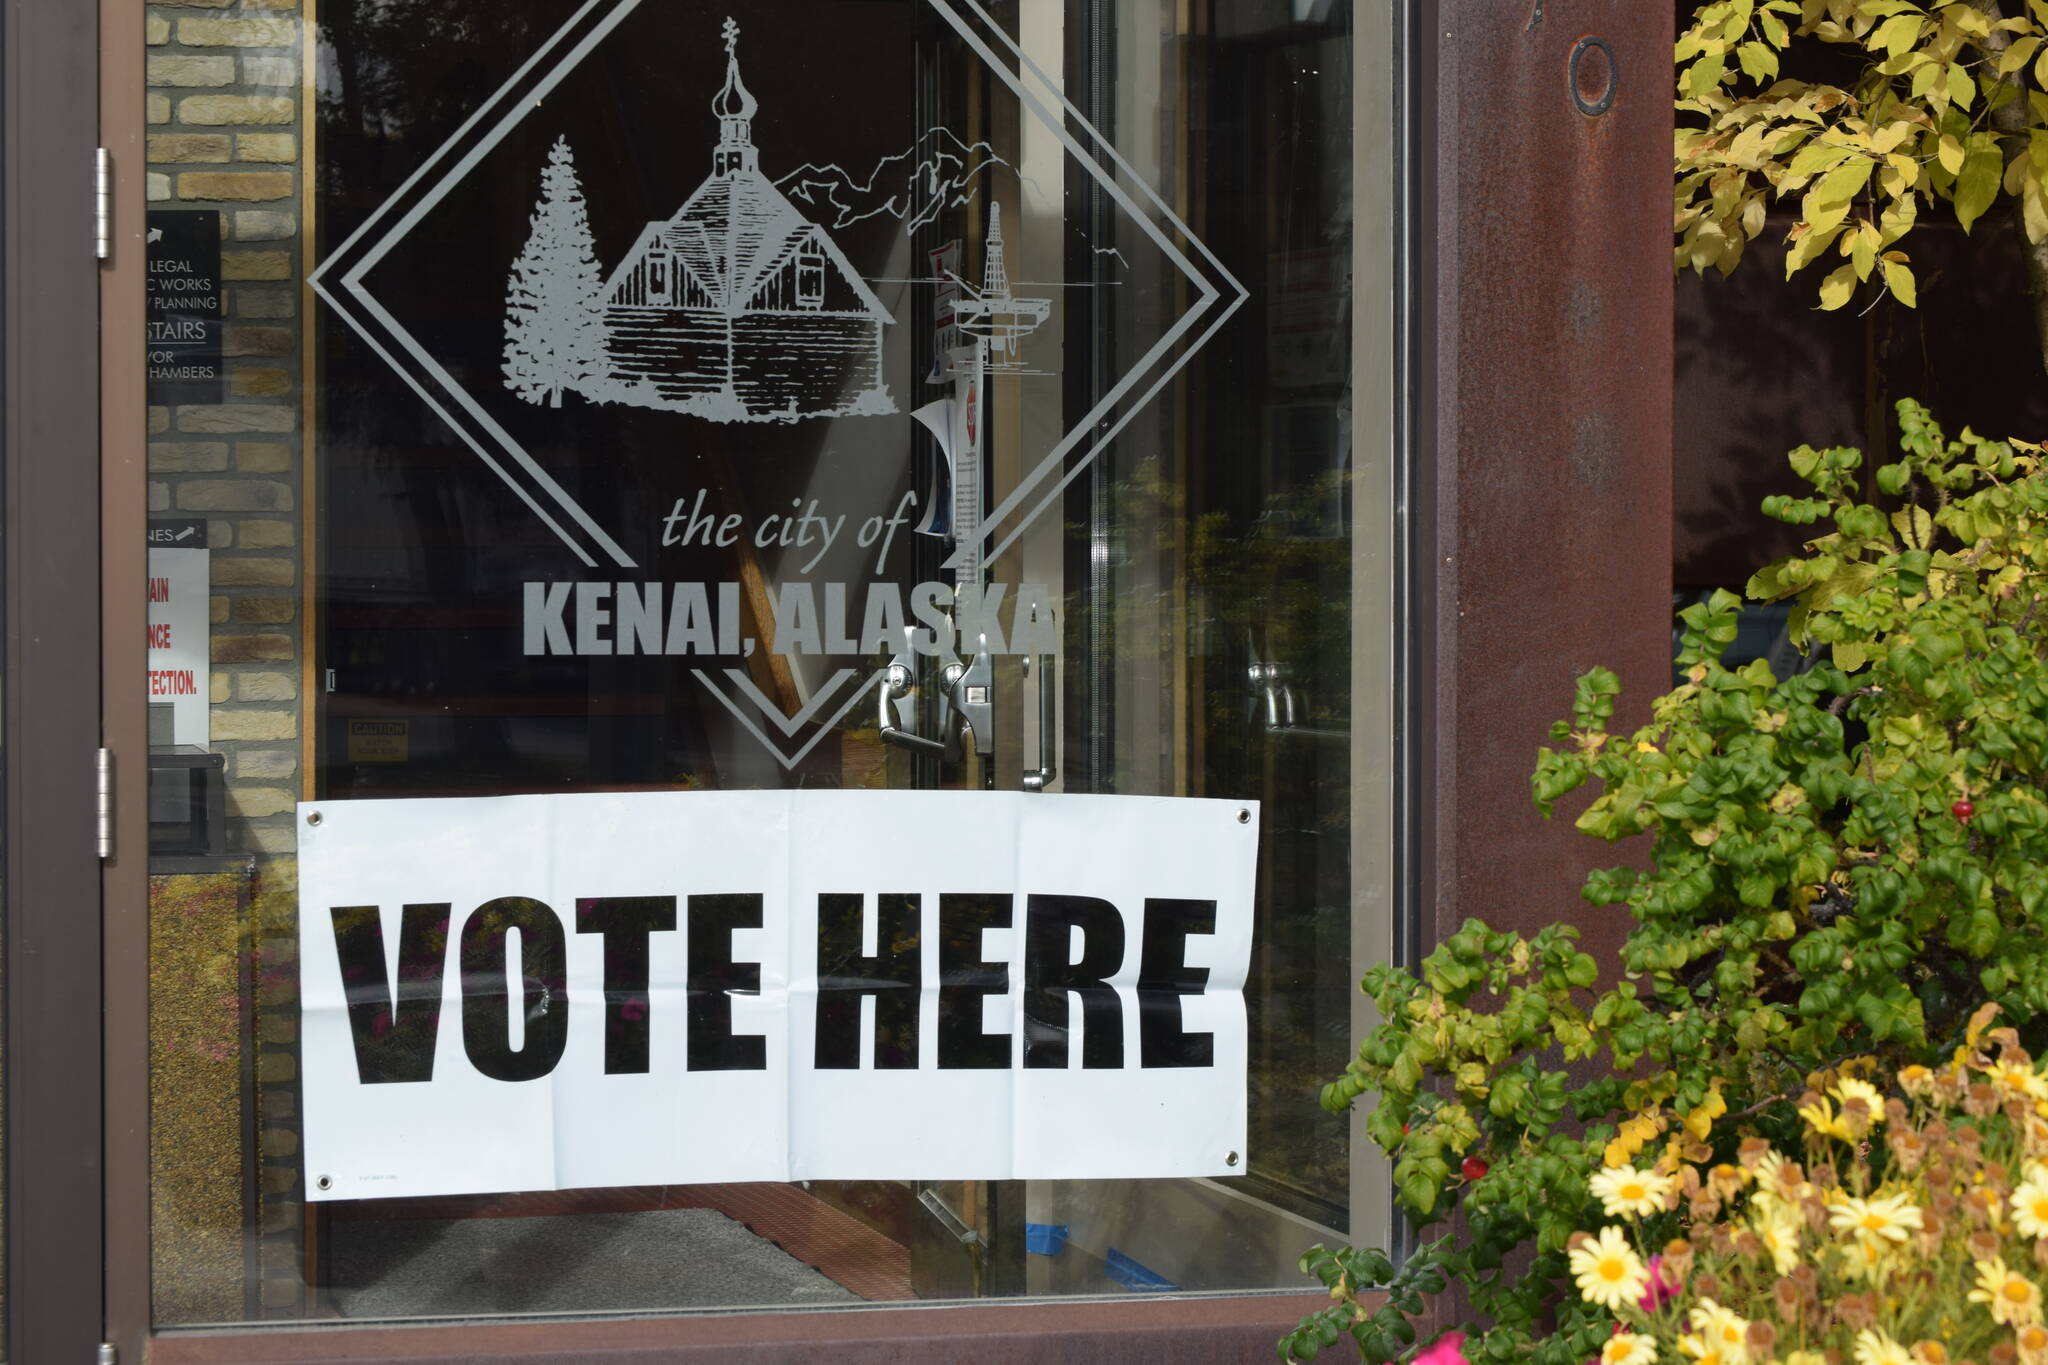 A “Vote Here” sign is seen at the City of Kenai building on Monday, Sept. 21 in Kenai, Alaska.